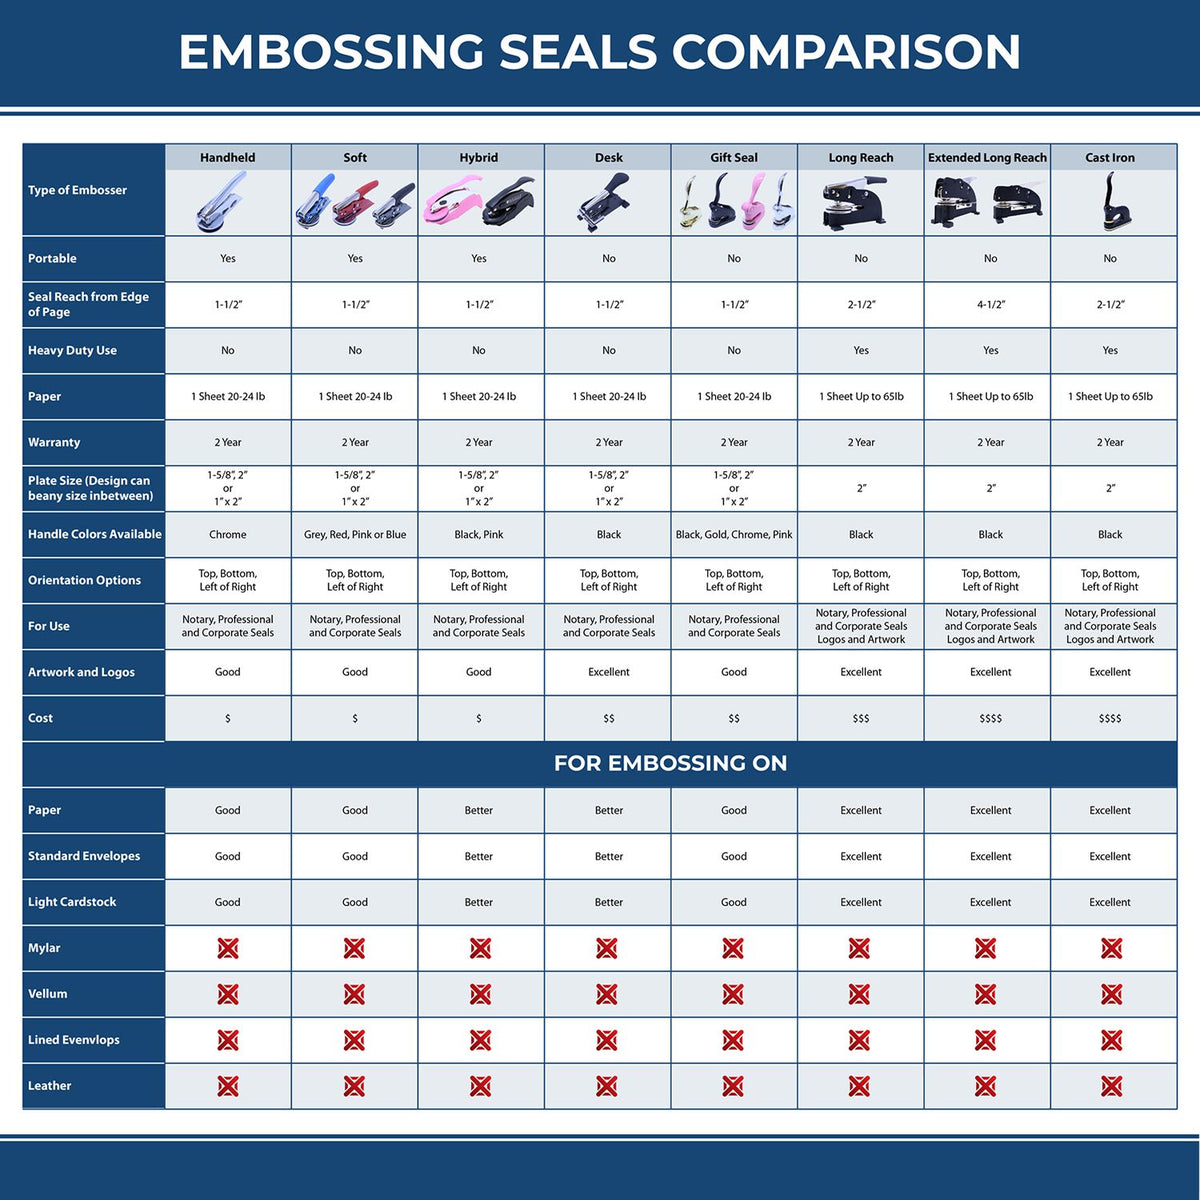 A comparison chart for the different types of mount models available for the Heavy Duty Cast Iron Guam Geologist Seal Embosser